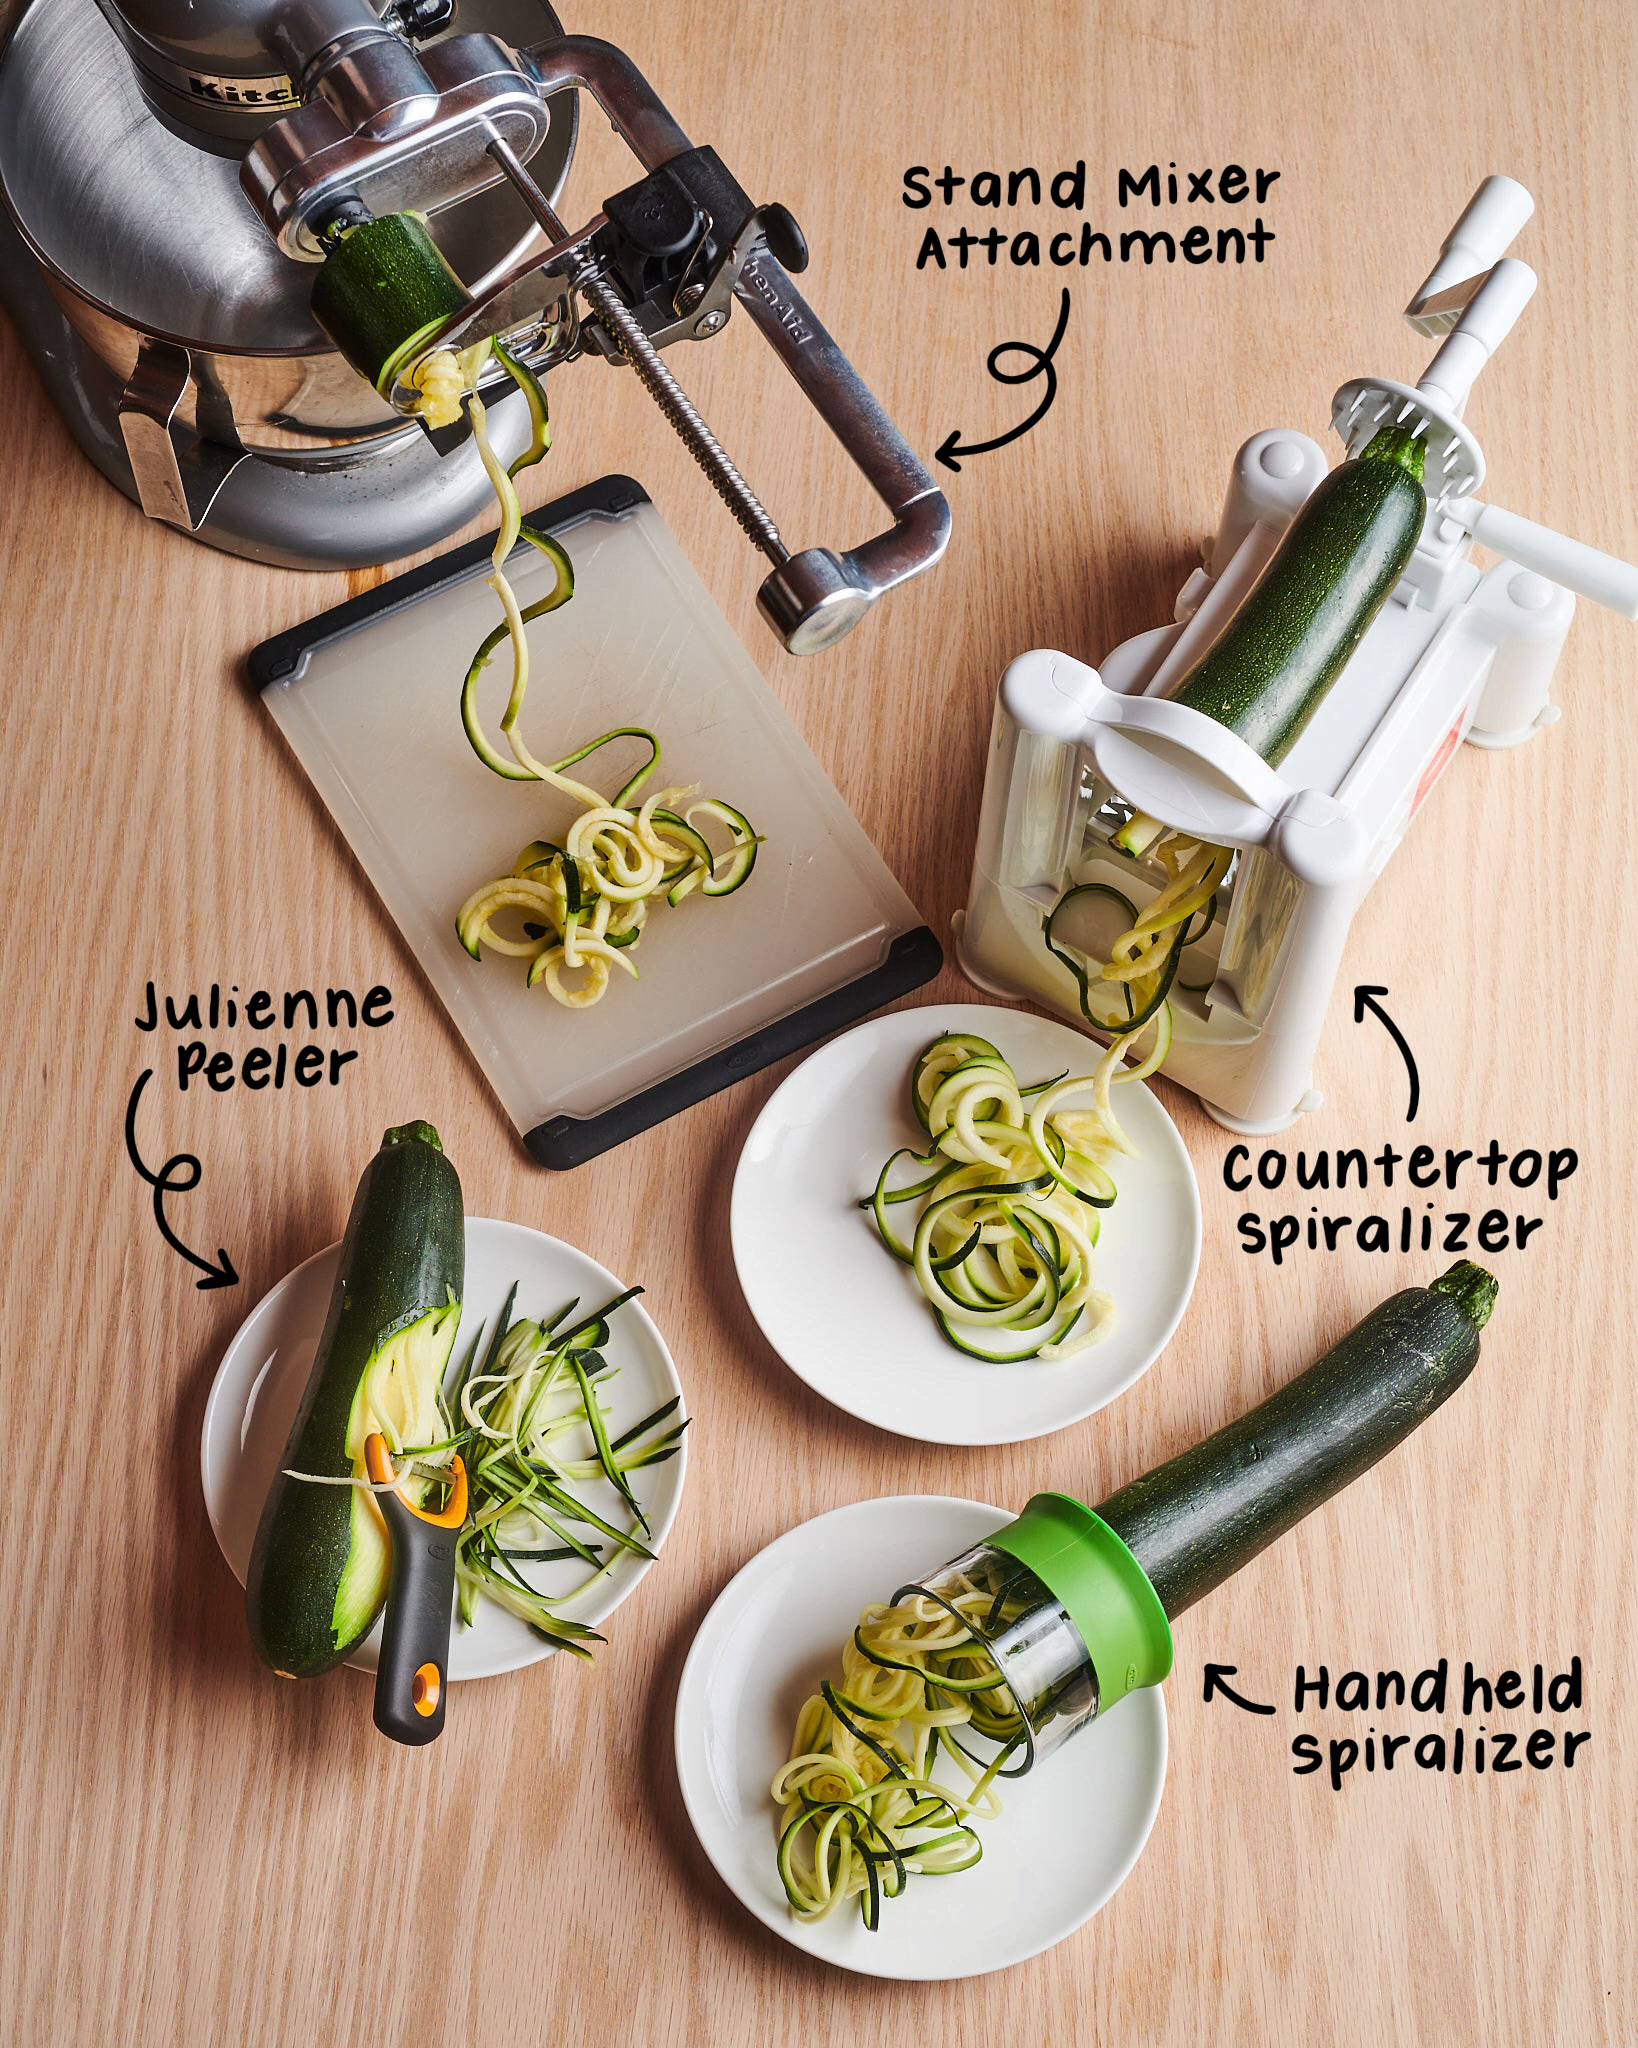 10 Vegetables You Didn't Know You Could Spiralize